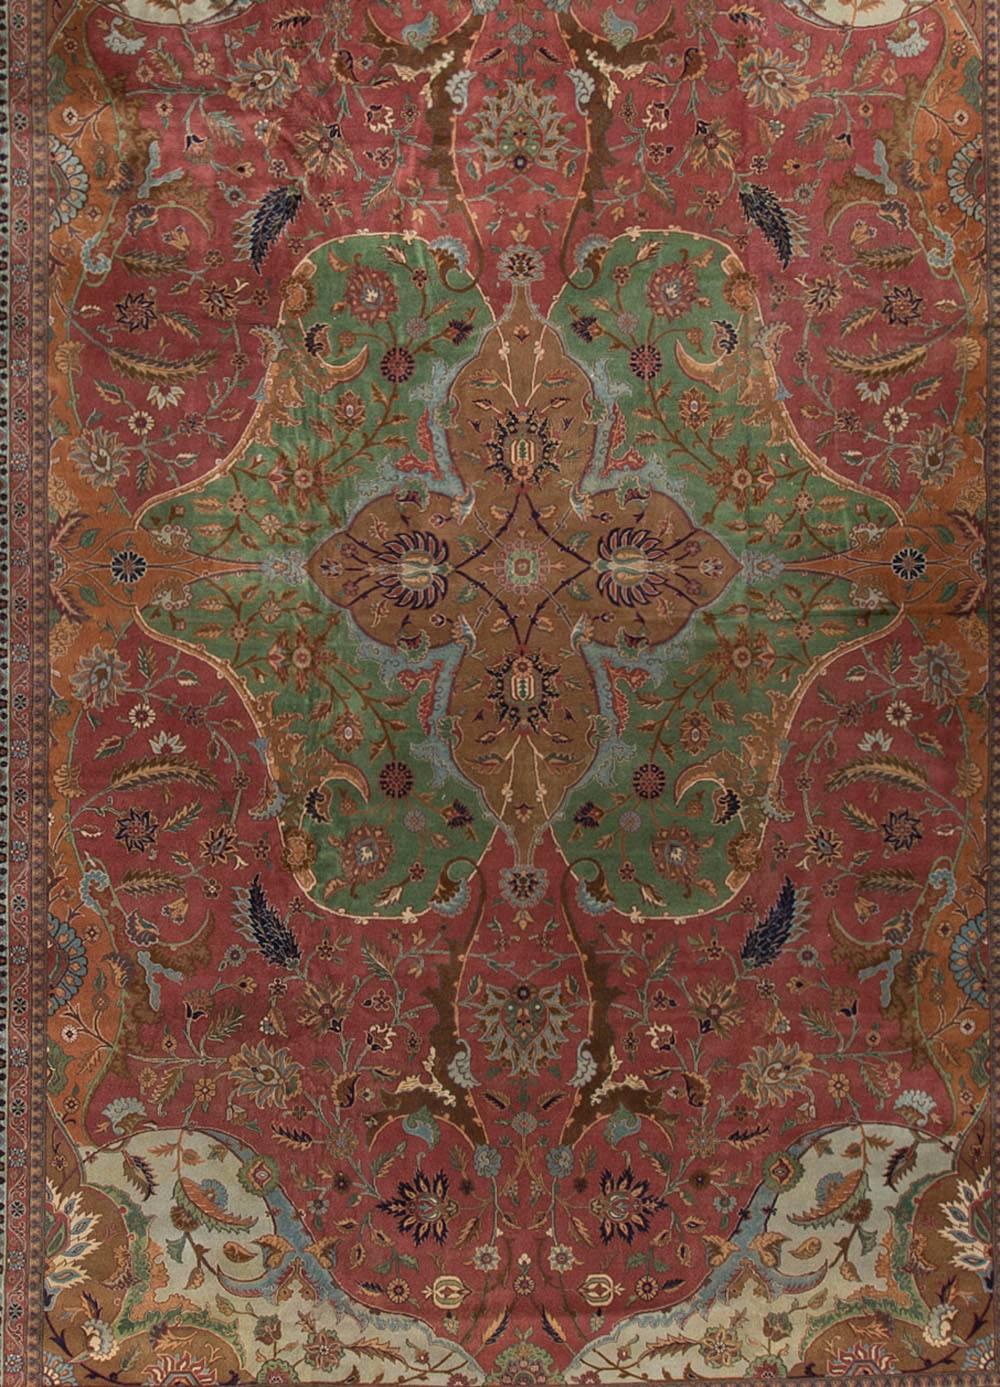 Large Vintage Turkish Sivas Rug circa 1940. The wonderful composition and colors in this rug go to create something very special in look and effect. The green central design enclosing a soft brown medallion with powder blue edges is so well offset